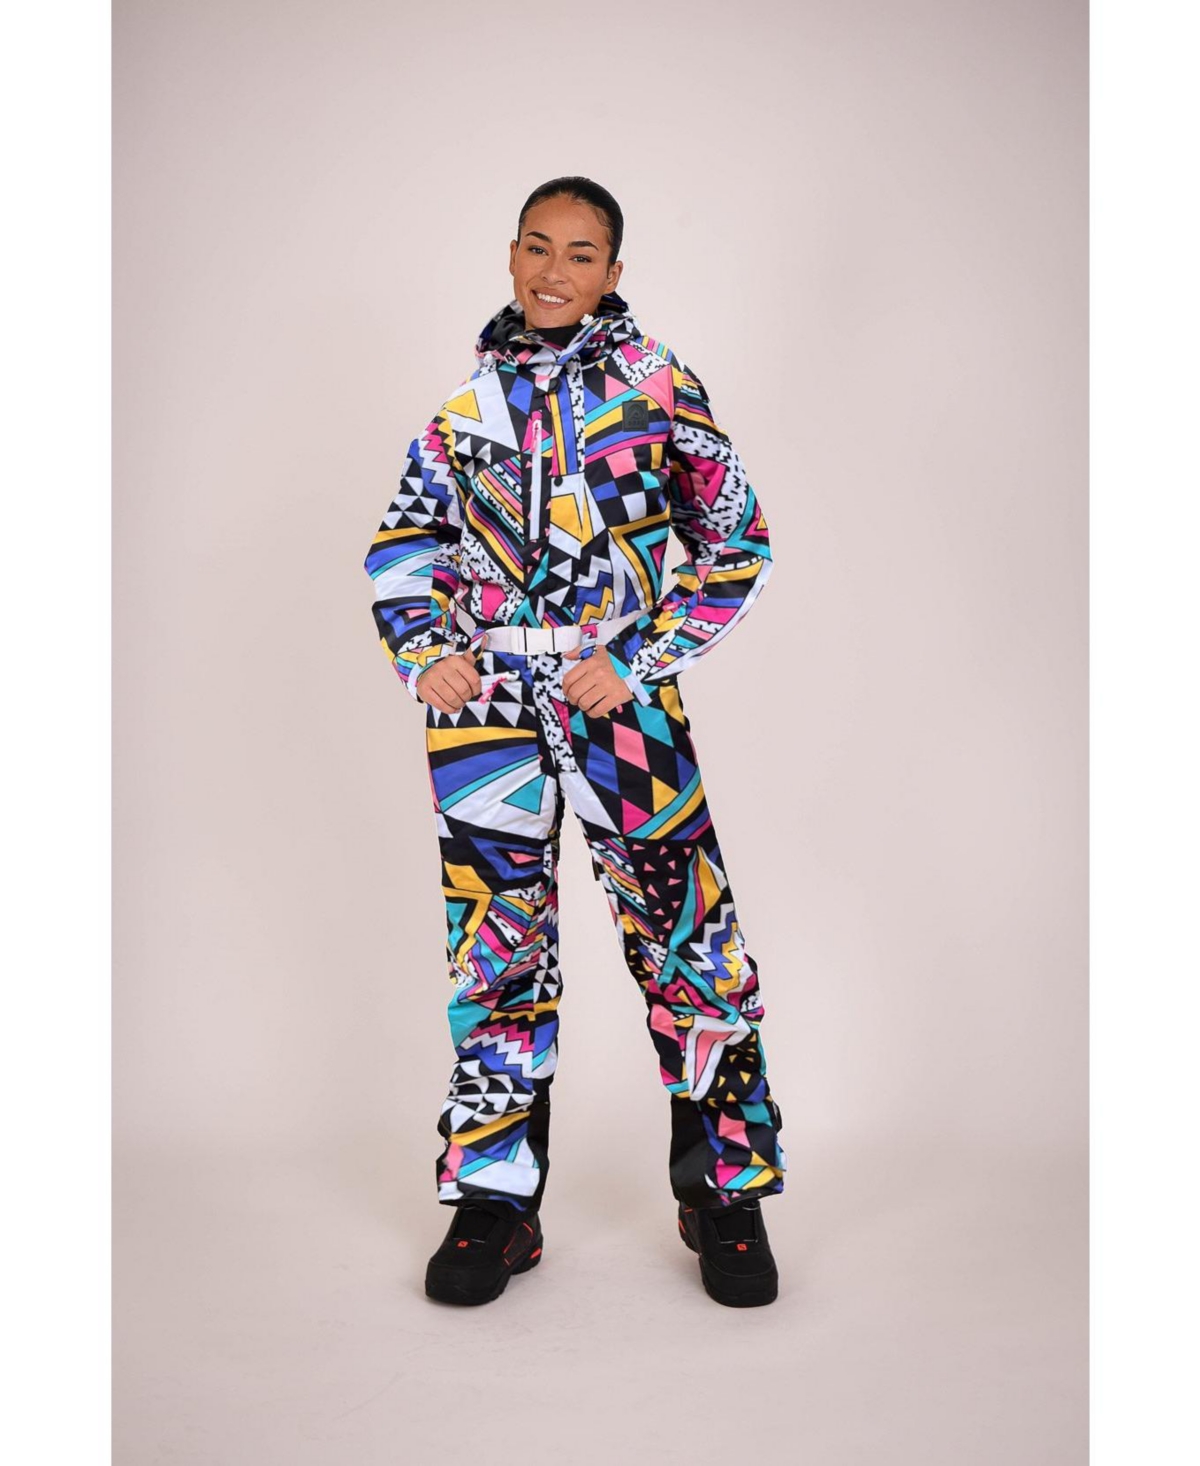 Blades of Glory Curved Women's Ski Suit - Multi